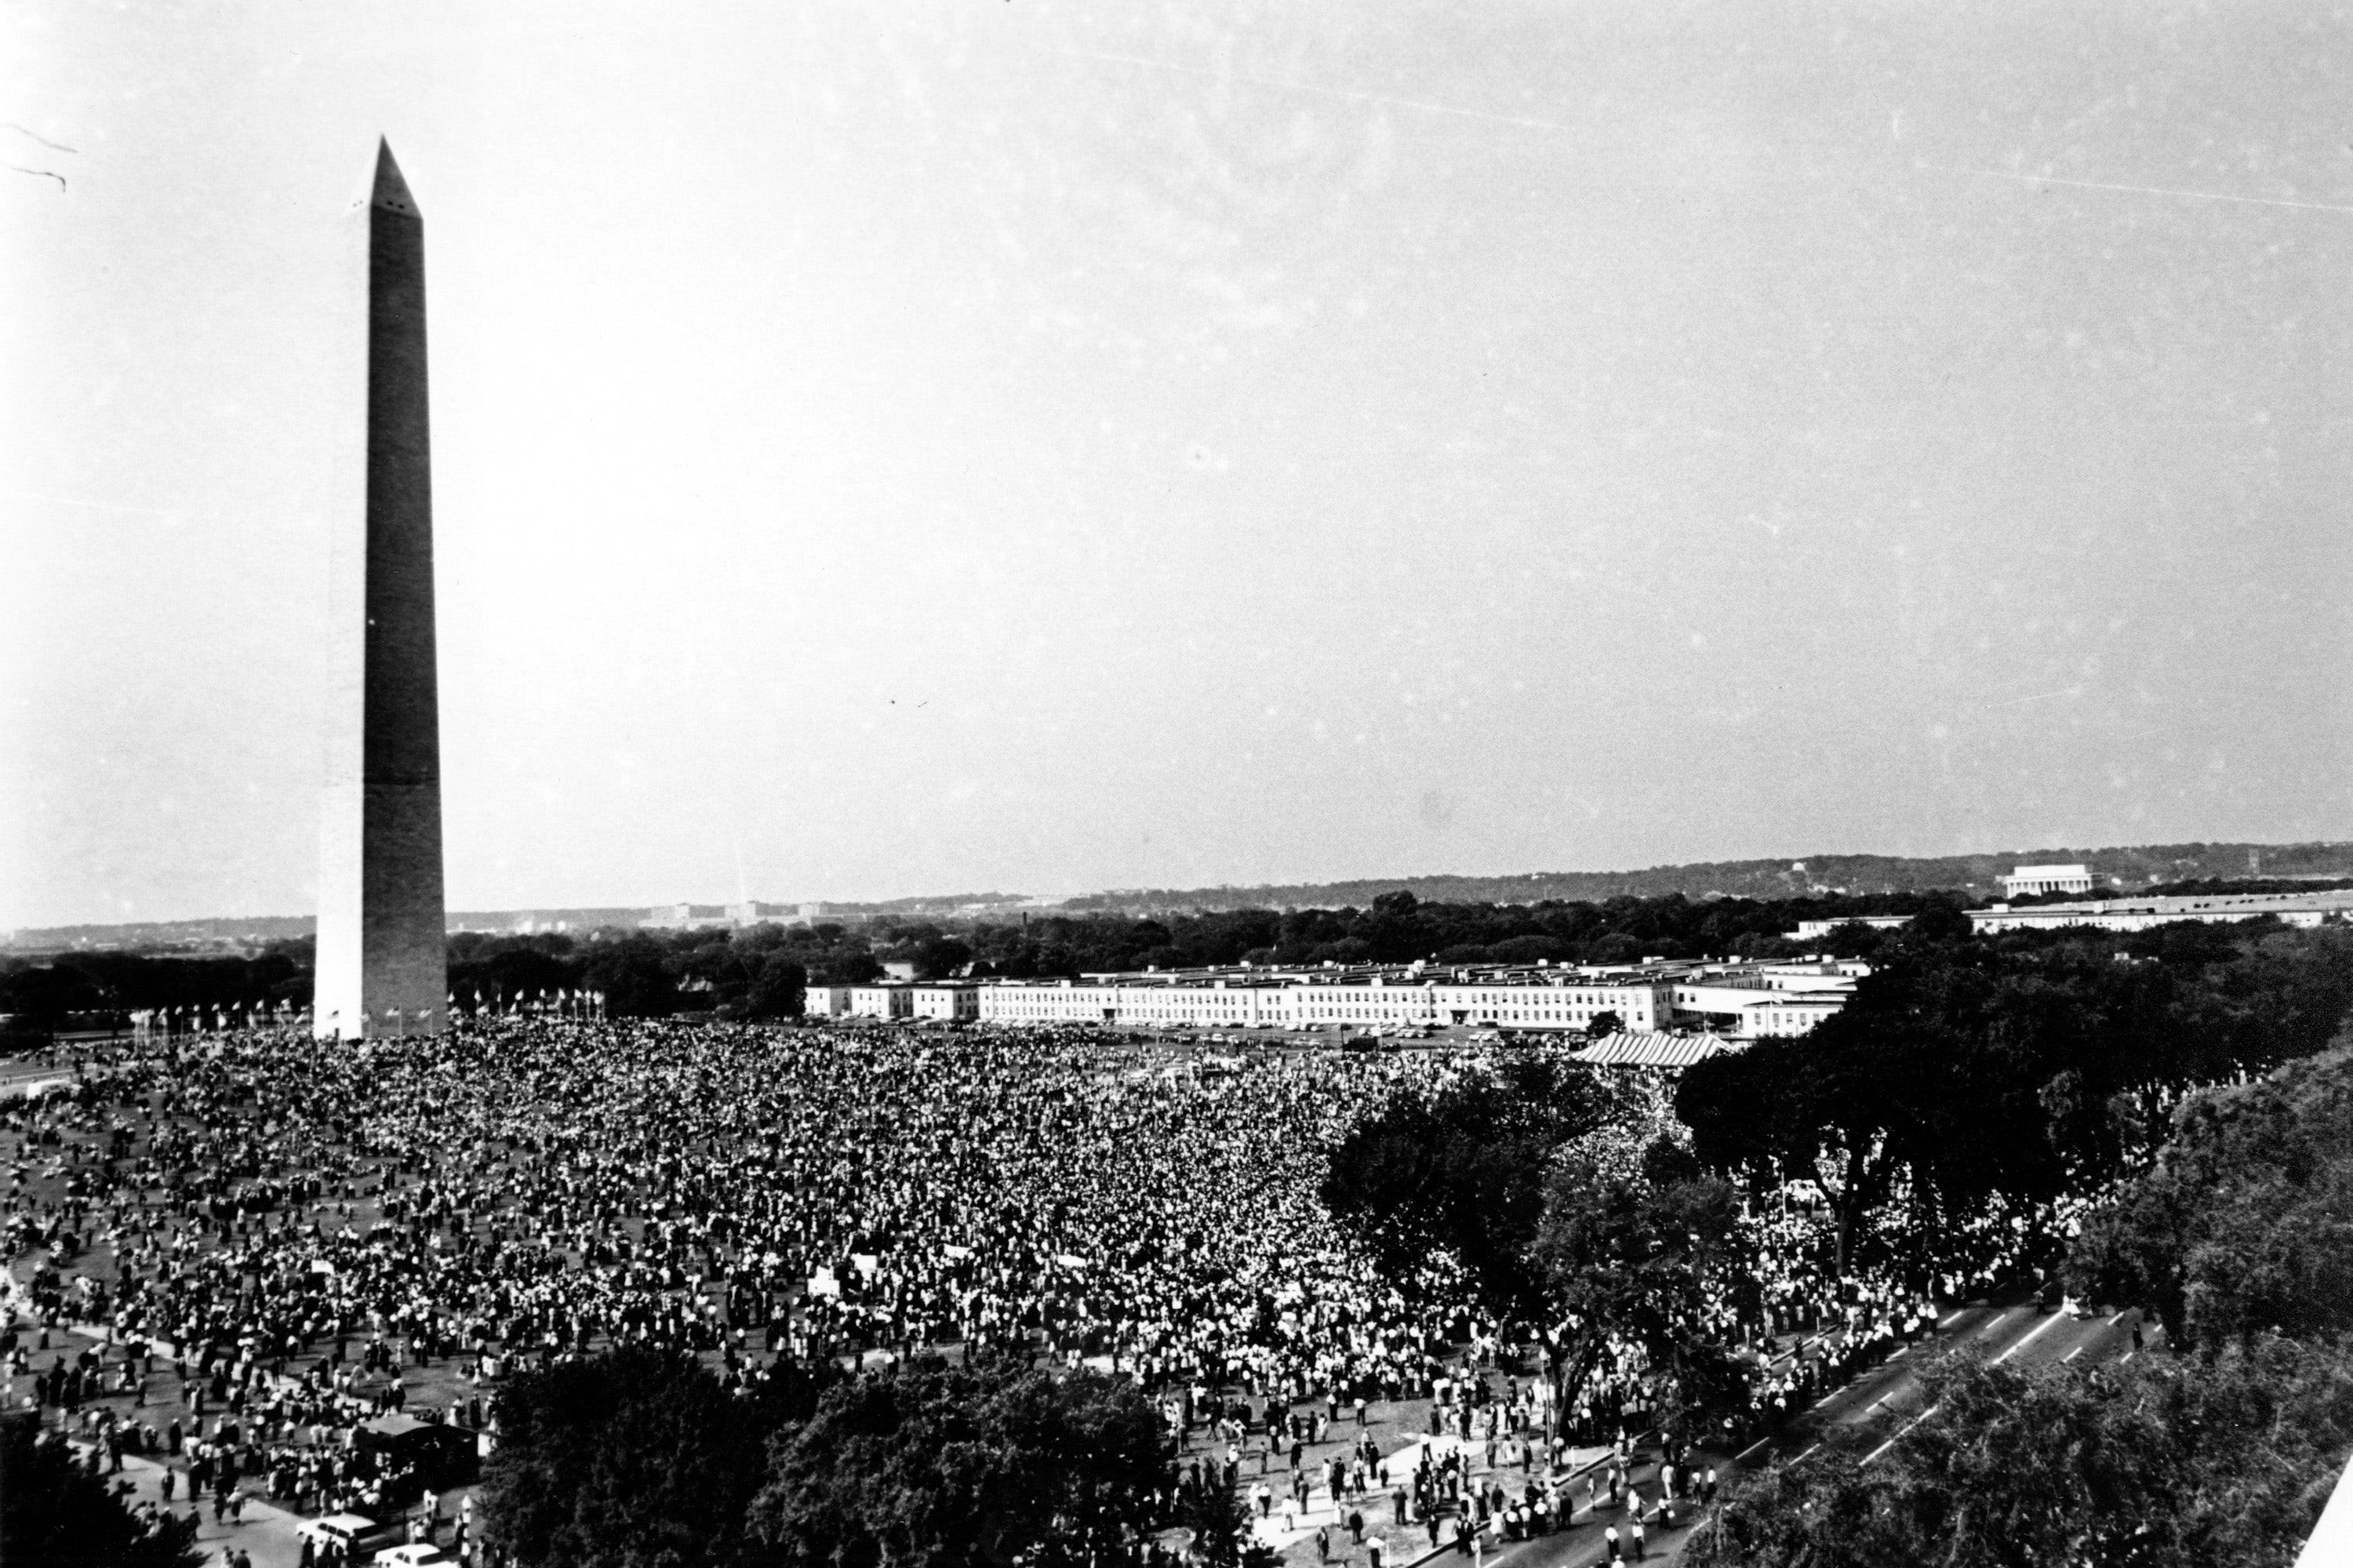 March on Washington, 1963 What to know